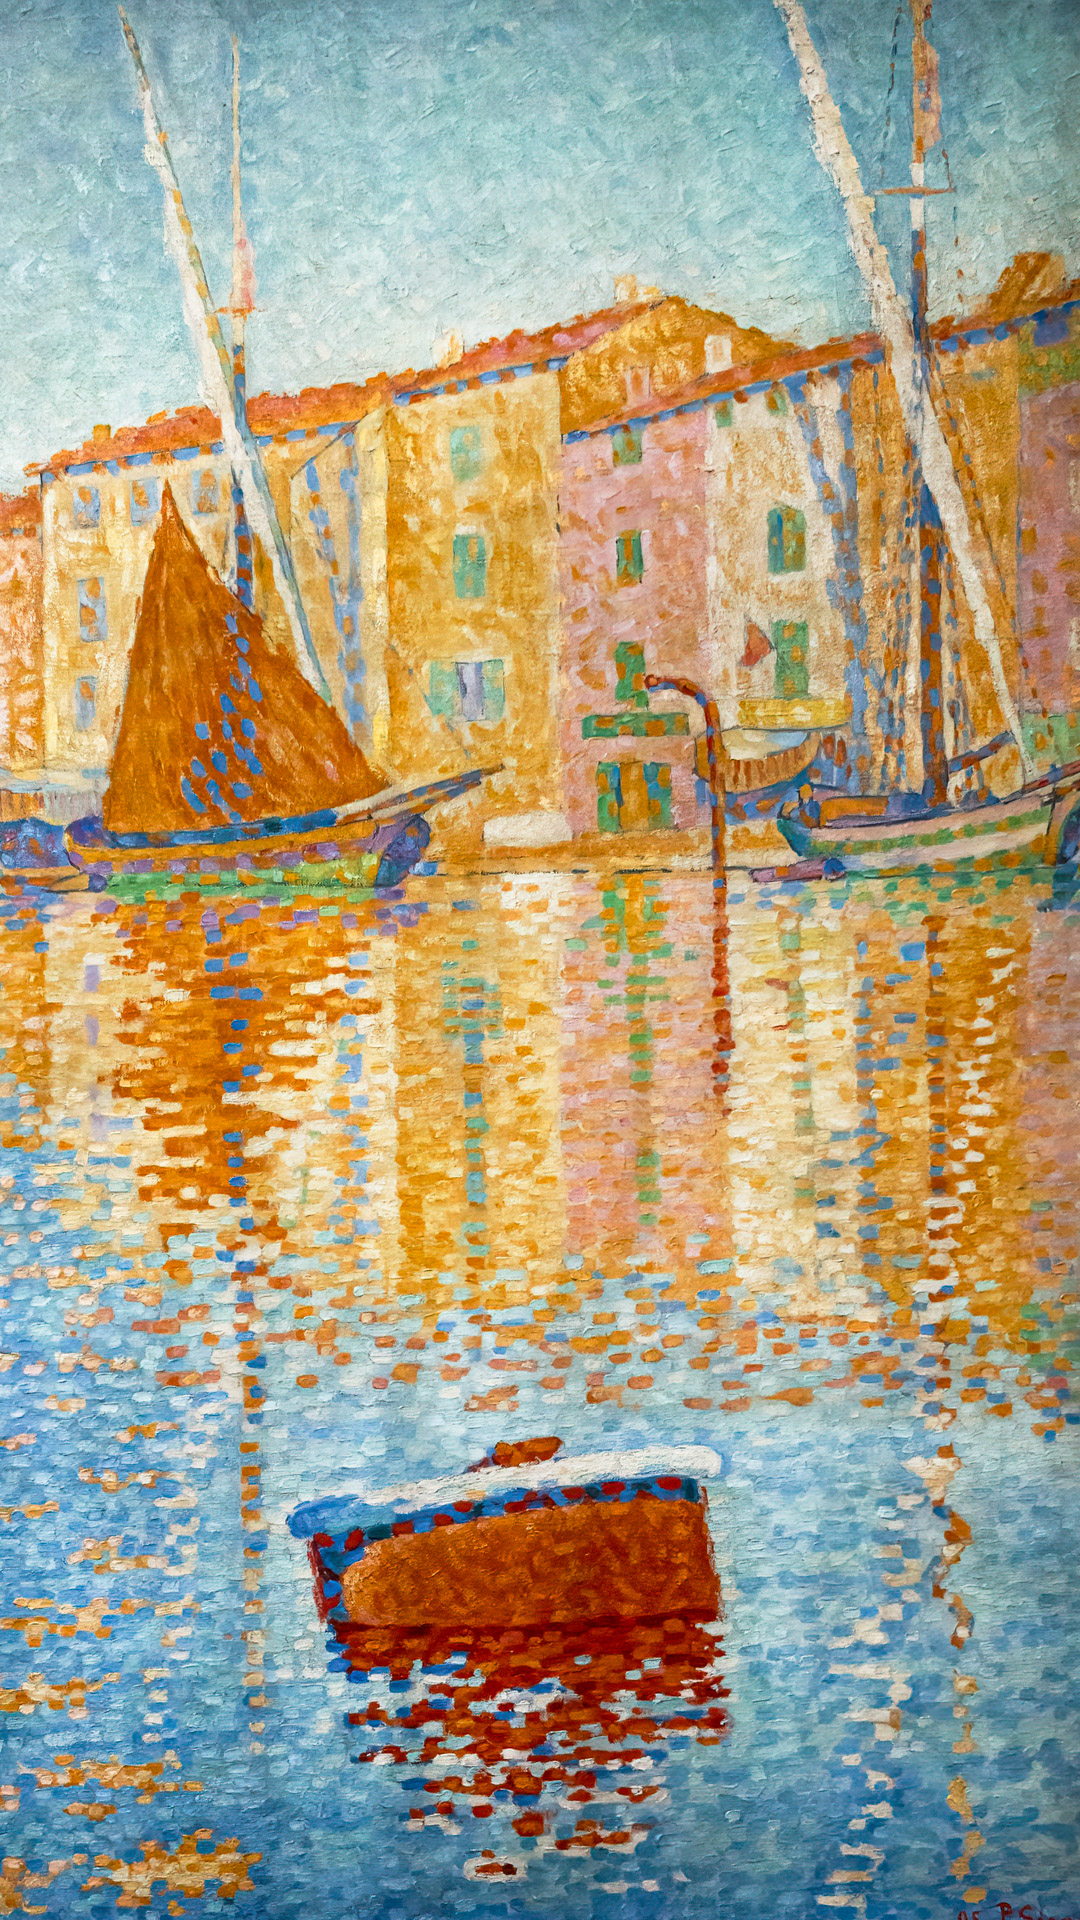 Paul Signac's vibrant brushstrokes come alive on your mobile, creating a dynamic display of pointillist brilliance.